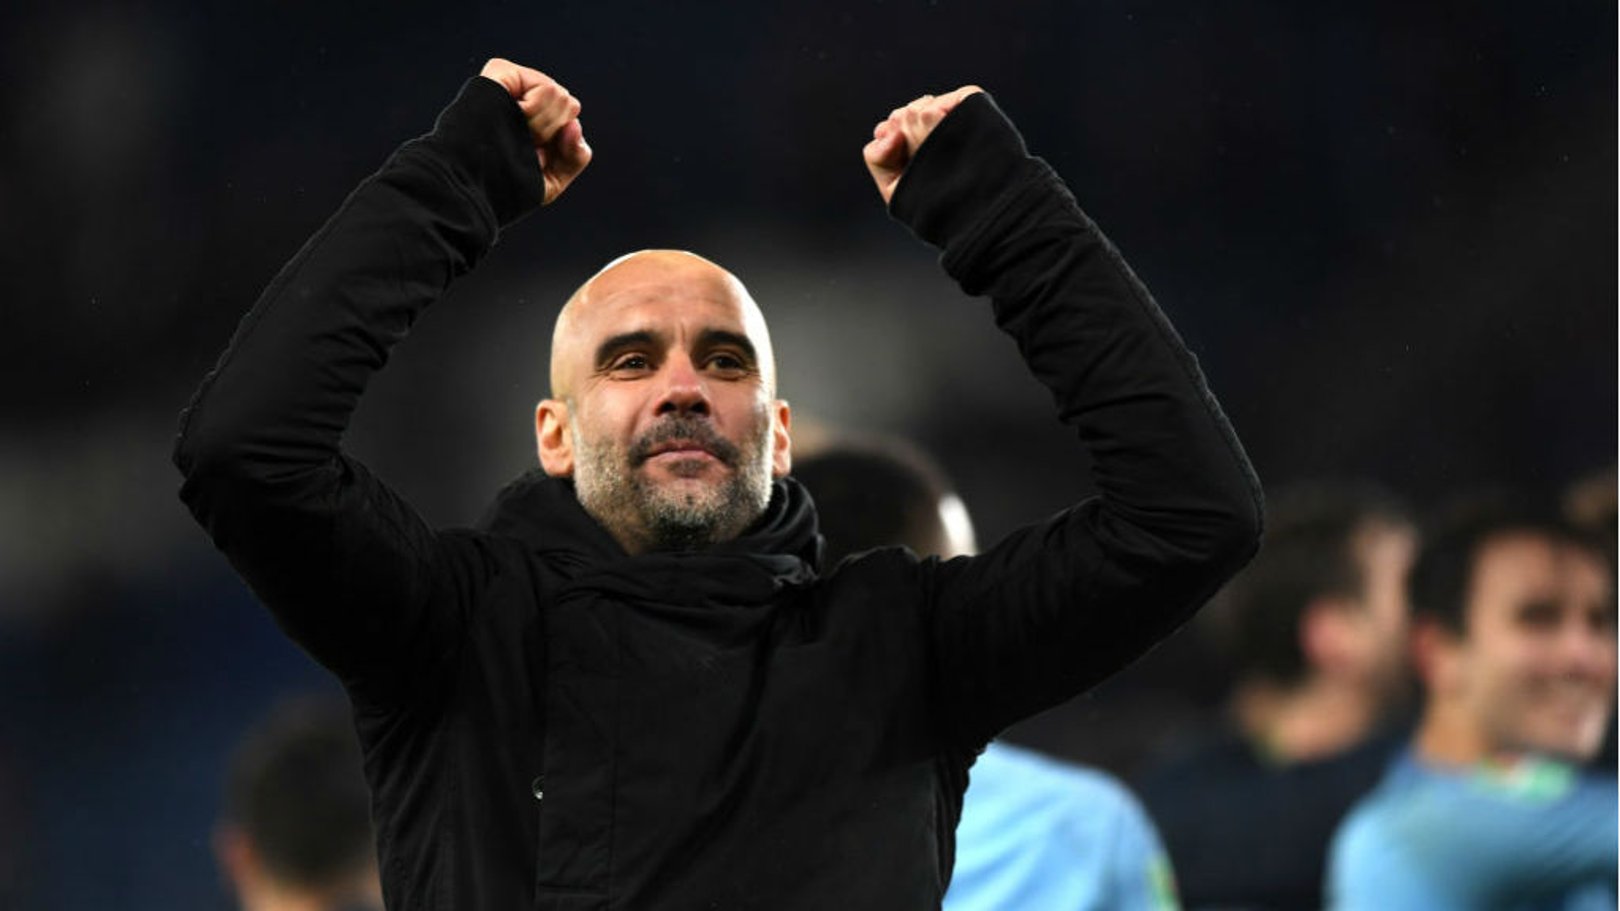 ALL SMILES: Pep Guardiola salutes the City fans after the Blues' spot-kick win